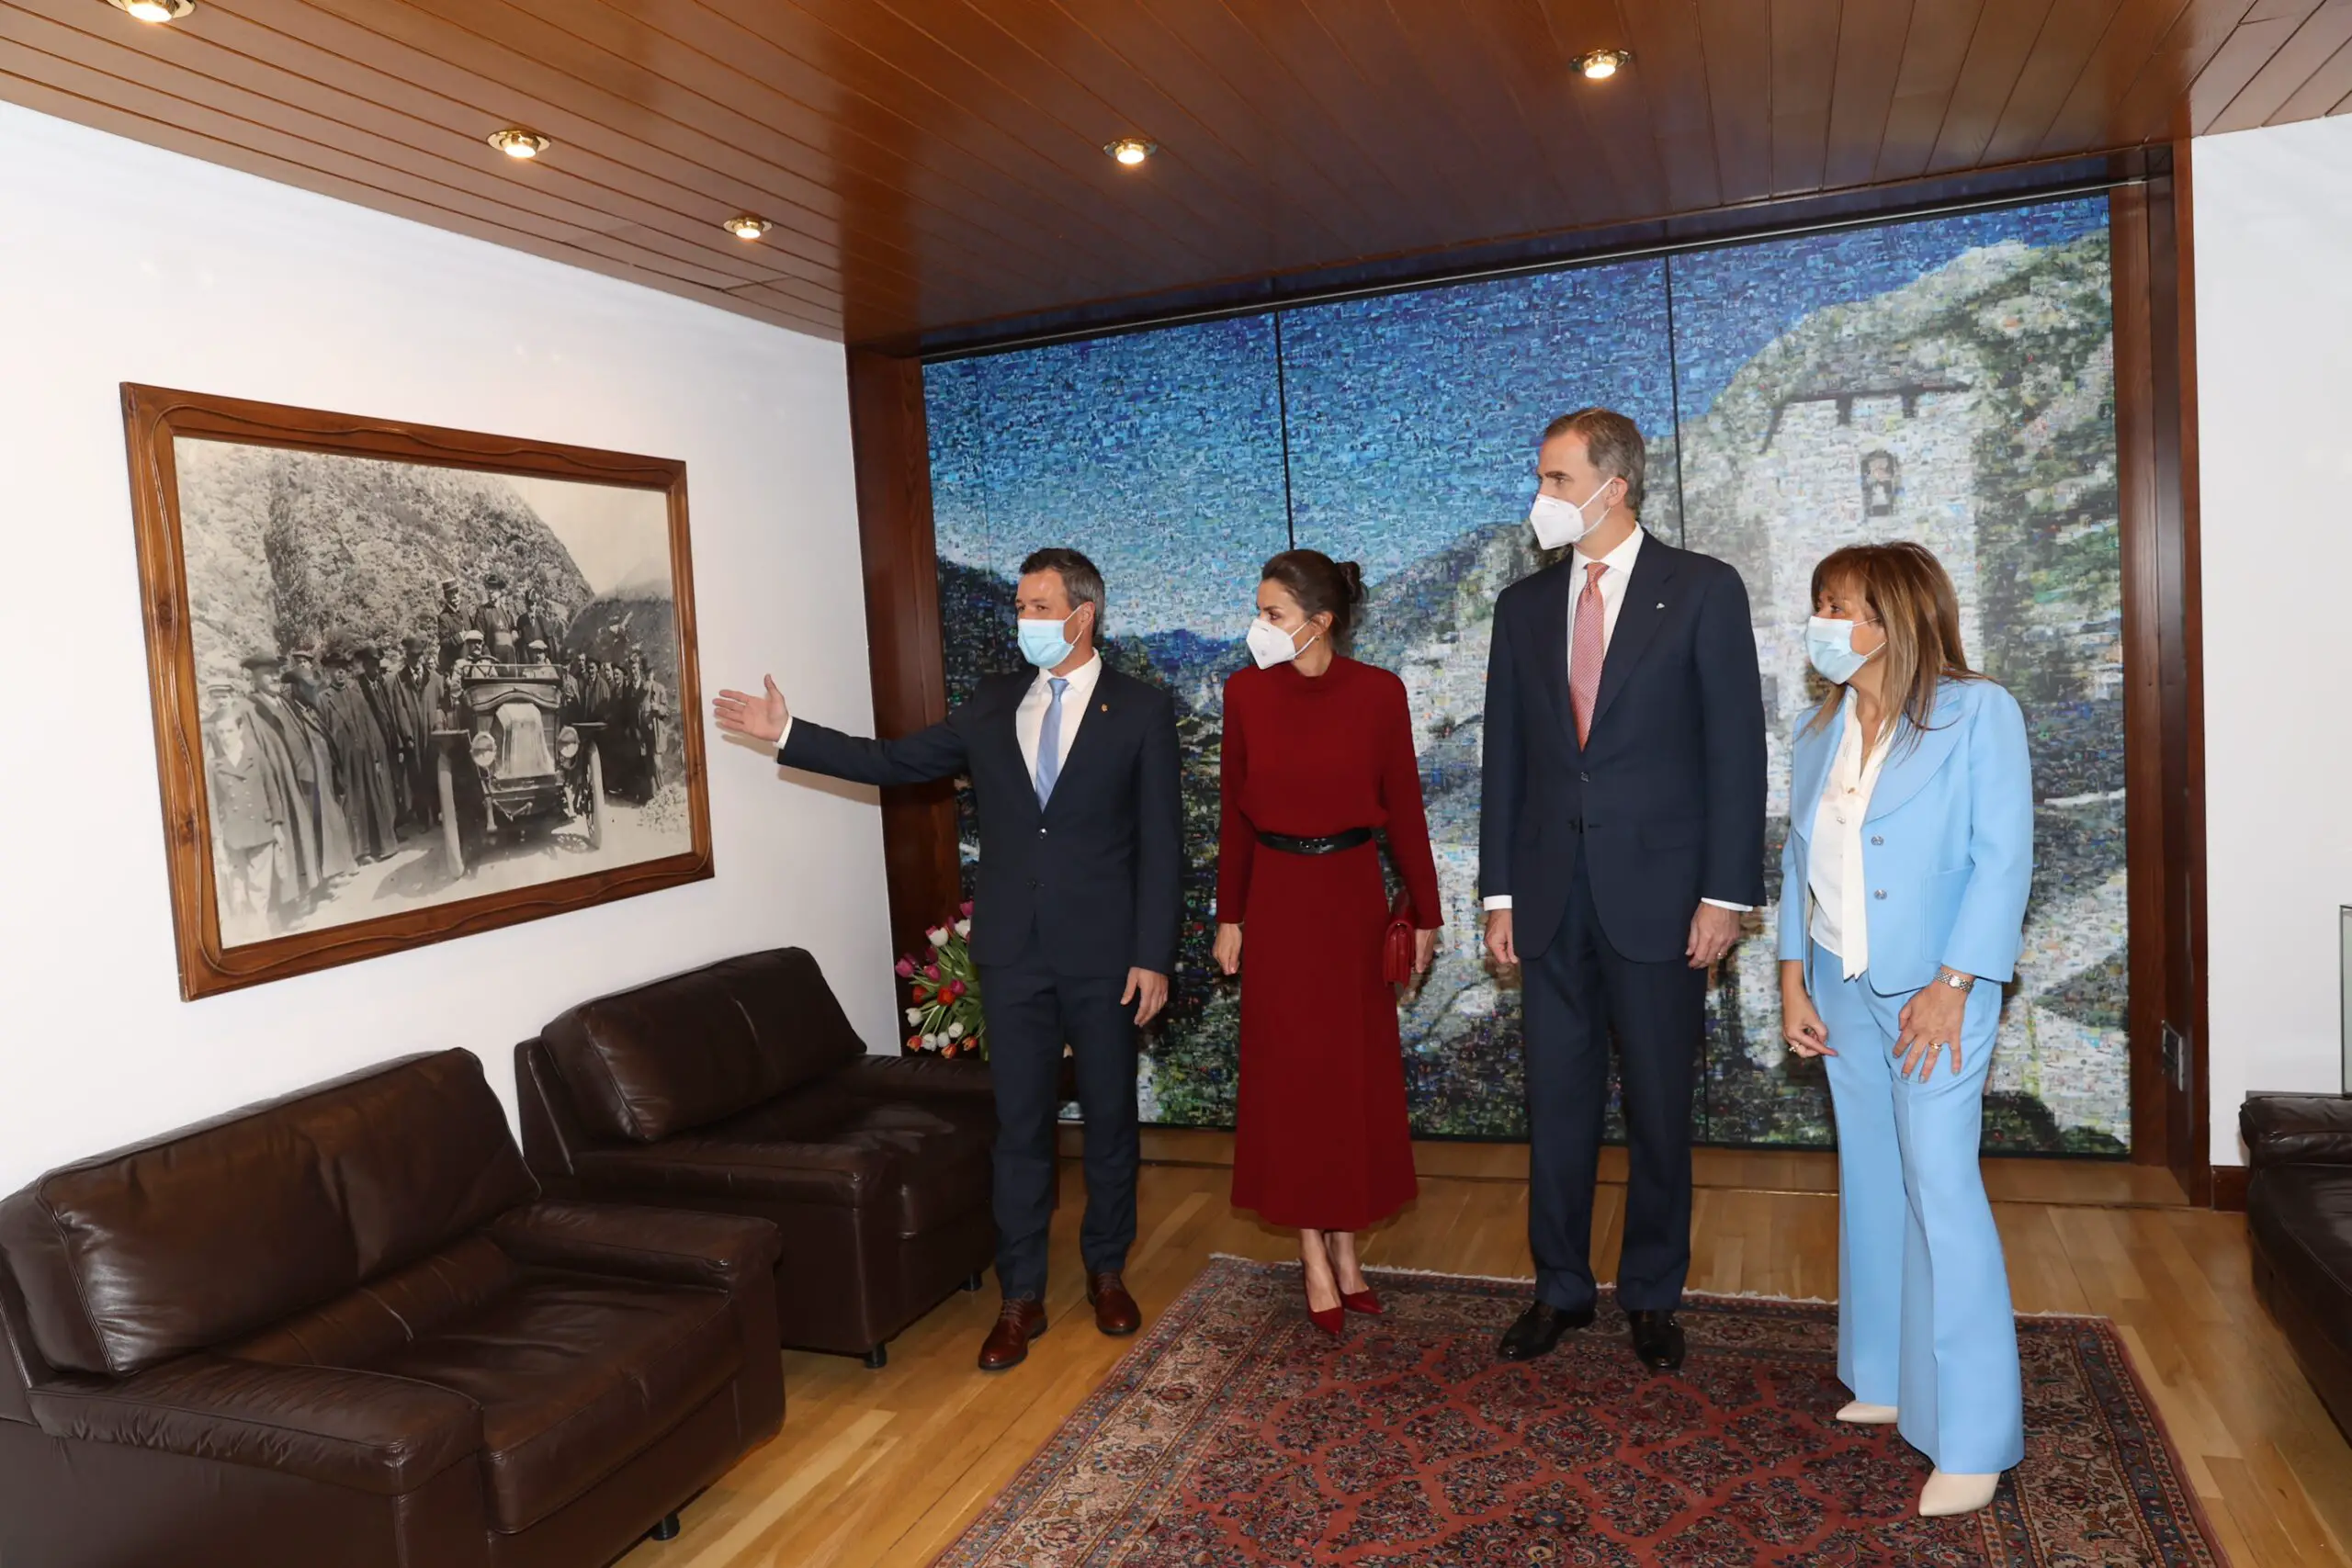 The couple received a guided tour of the Casa de la Vall.